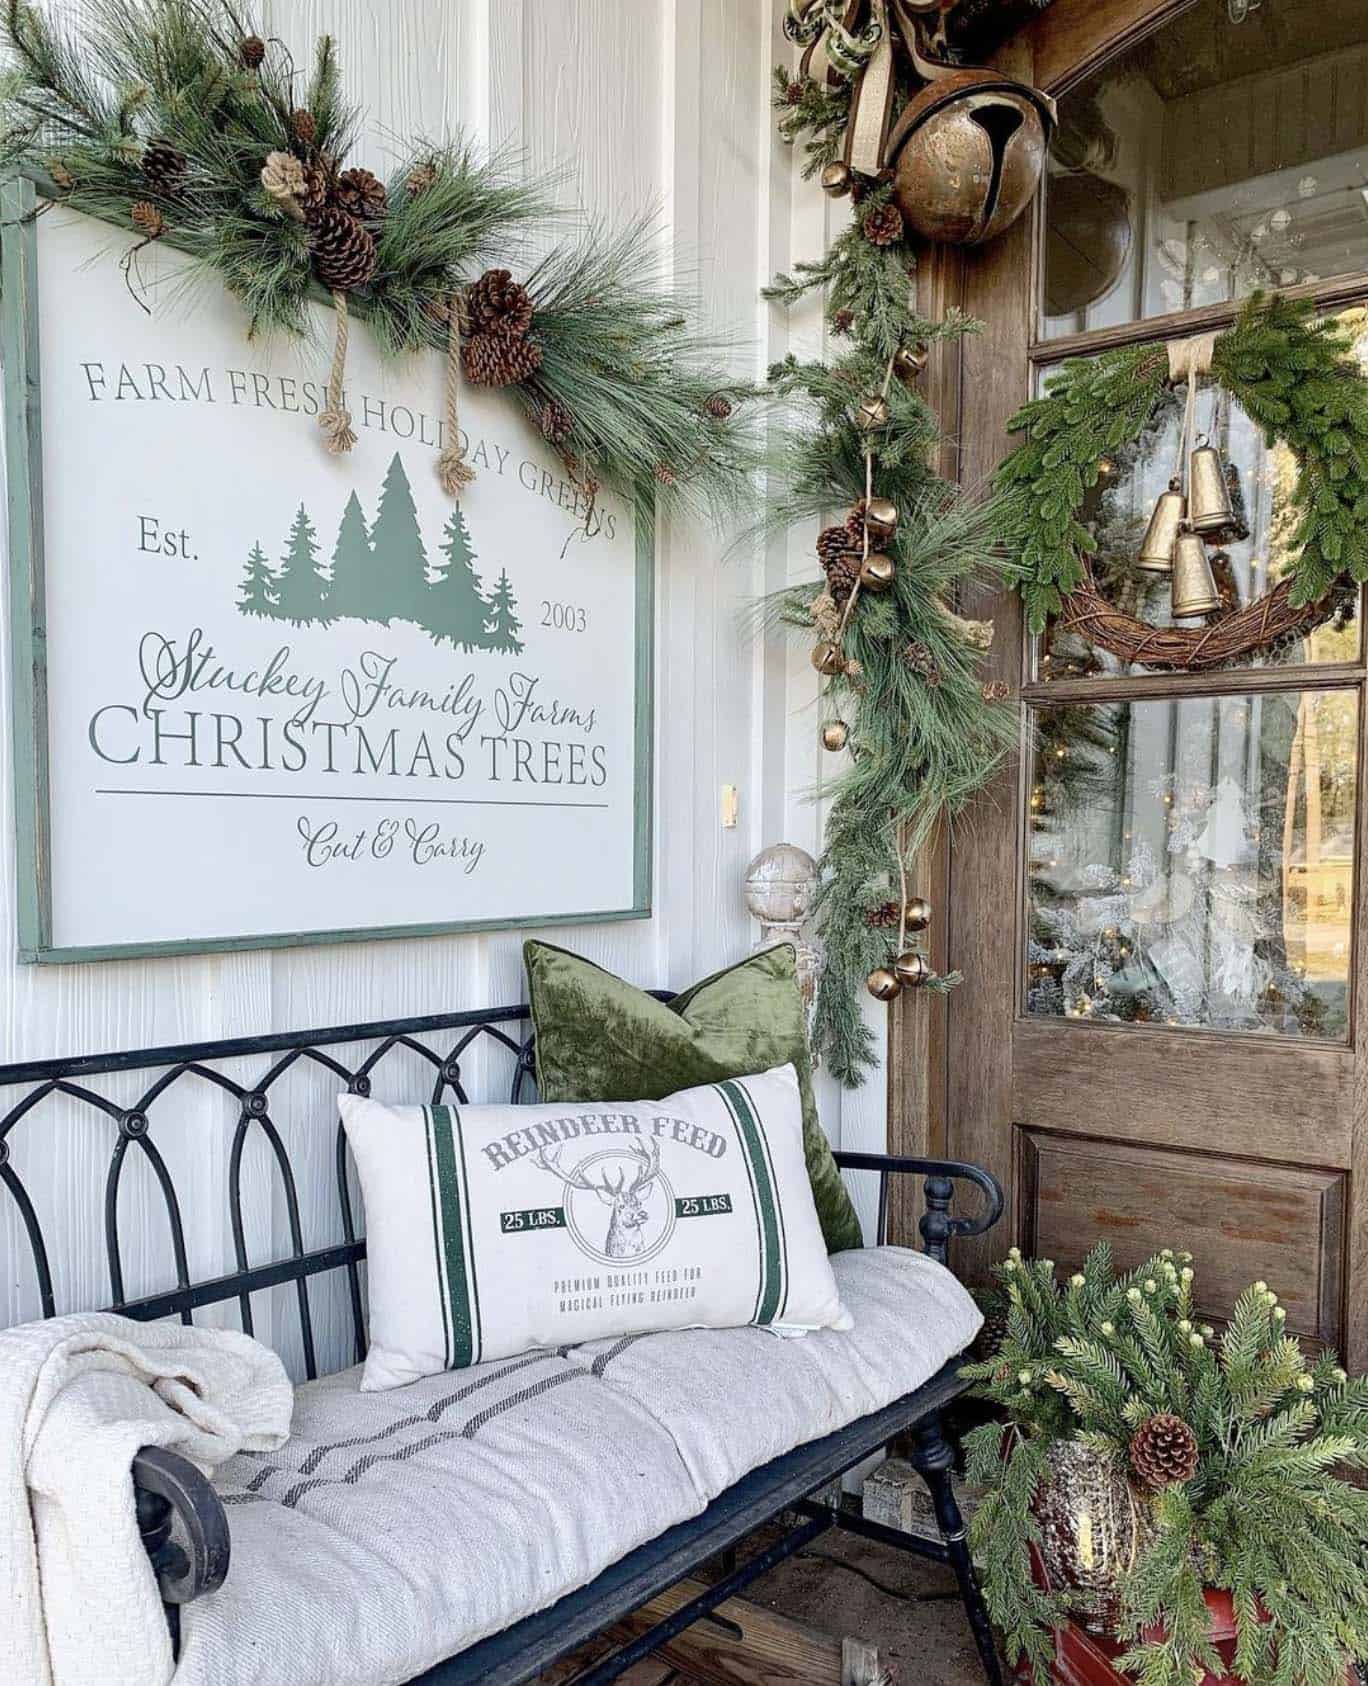 Christmas decorated front porch with a woodsy, natural, green theme